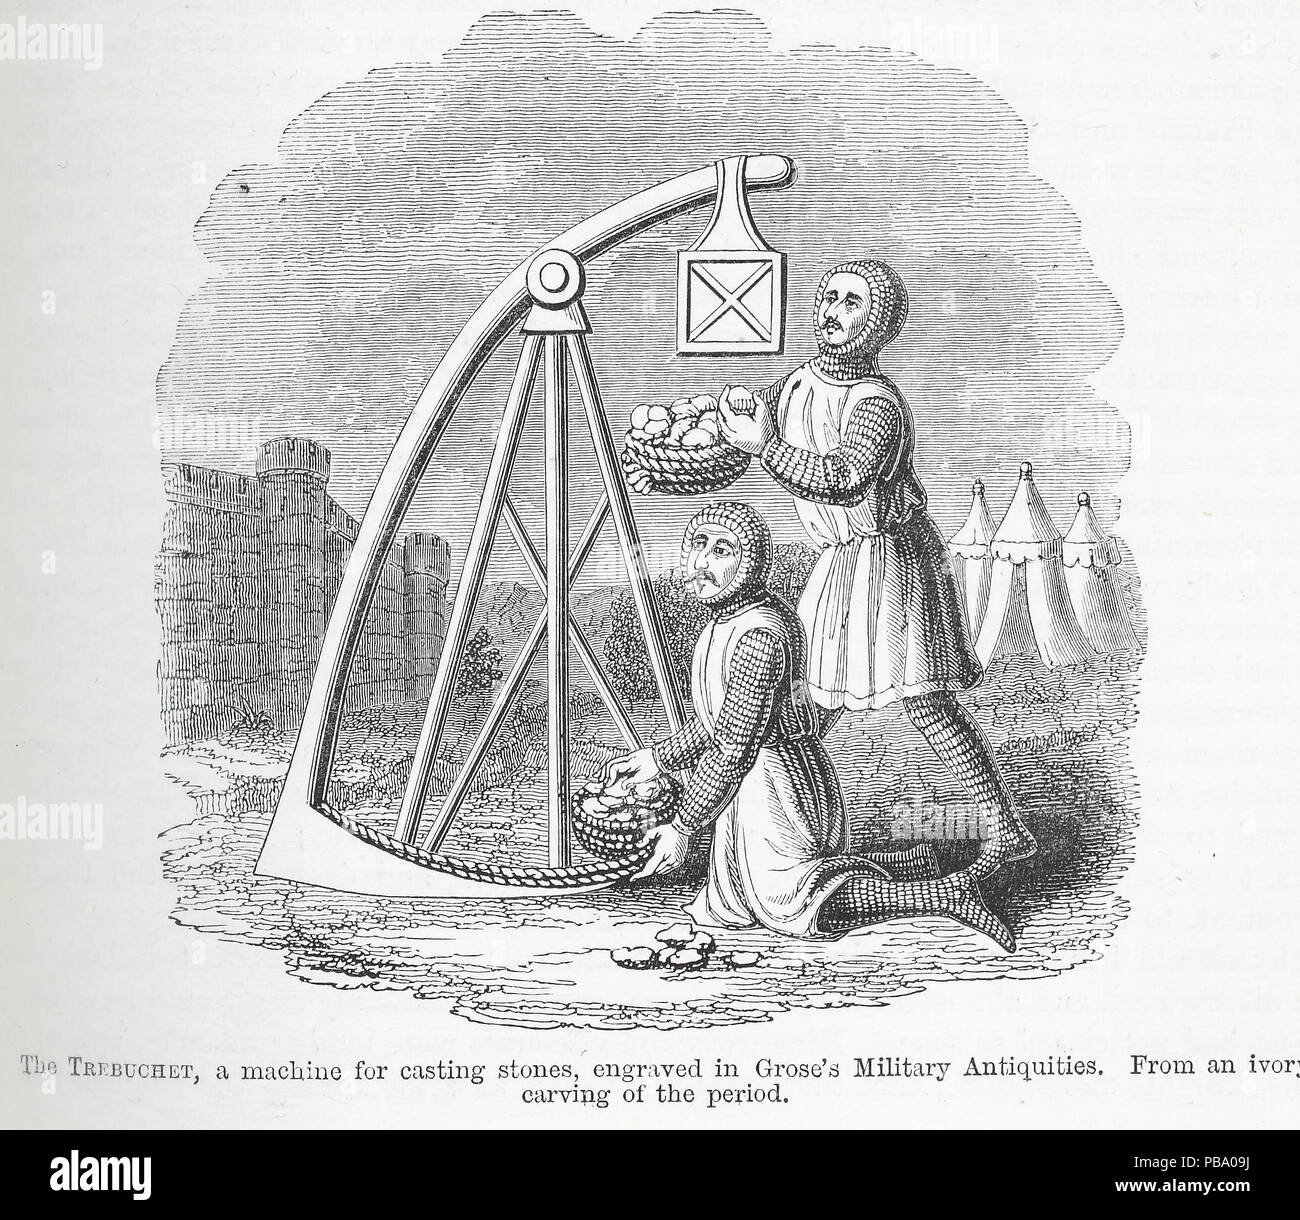 Illustration entitled,  'The Trebuchet, a machine for casting stones, engraved in Grose's Military Antiquities. From an ivory carving of the period.' Stock Photo